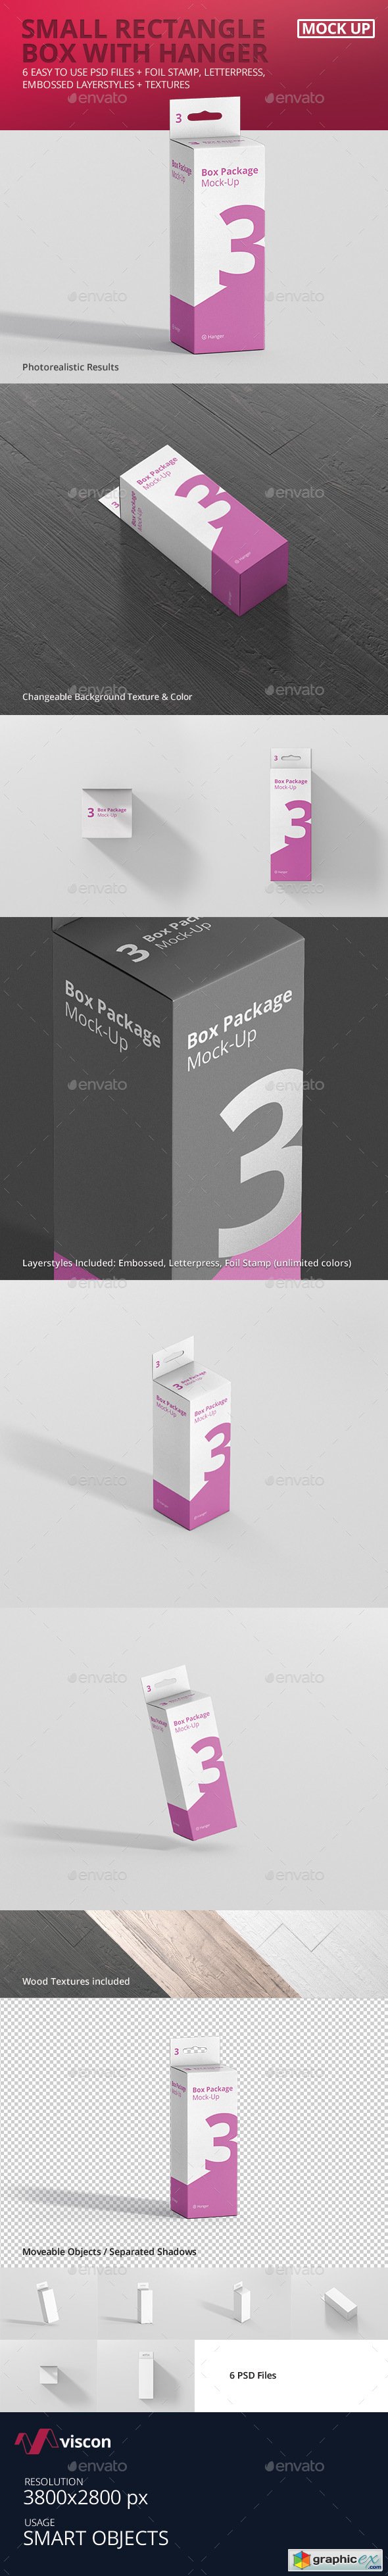 Package Box Mock-Up - Small Rectangle with Hanger